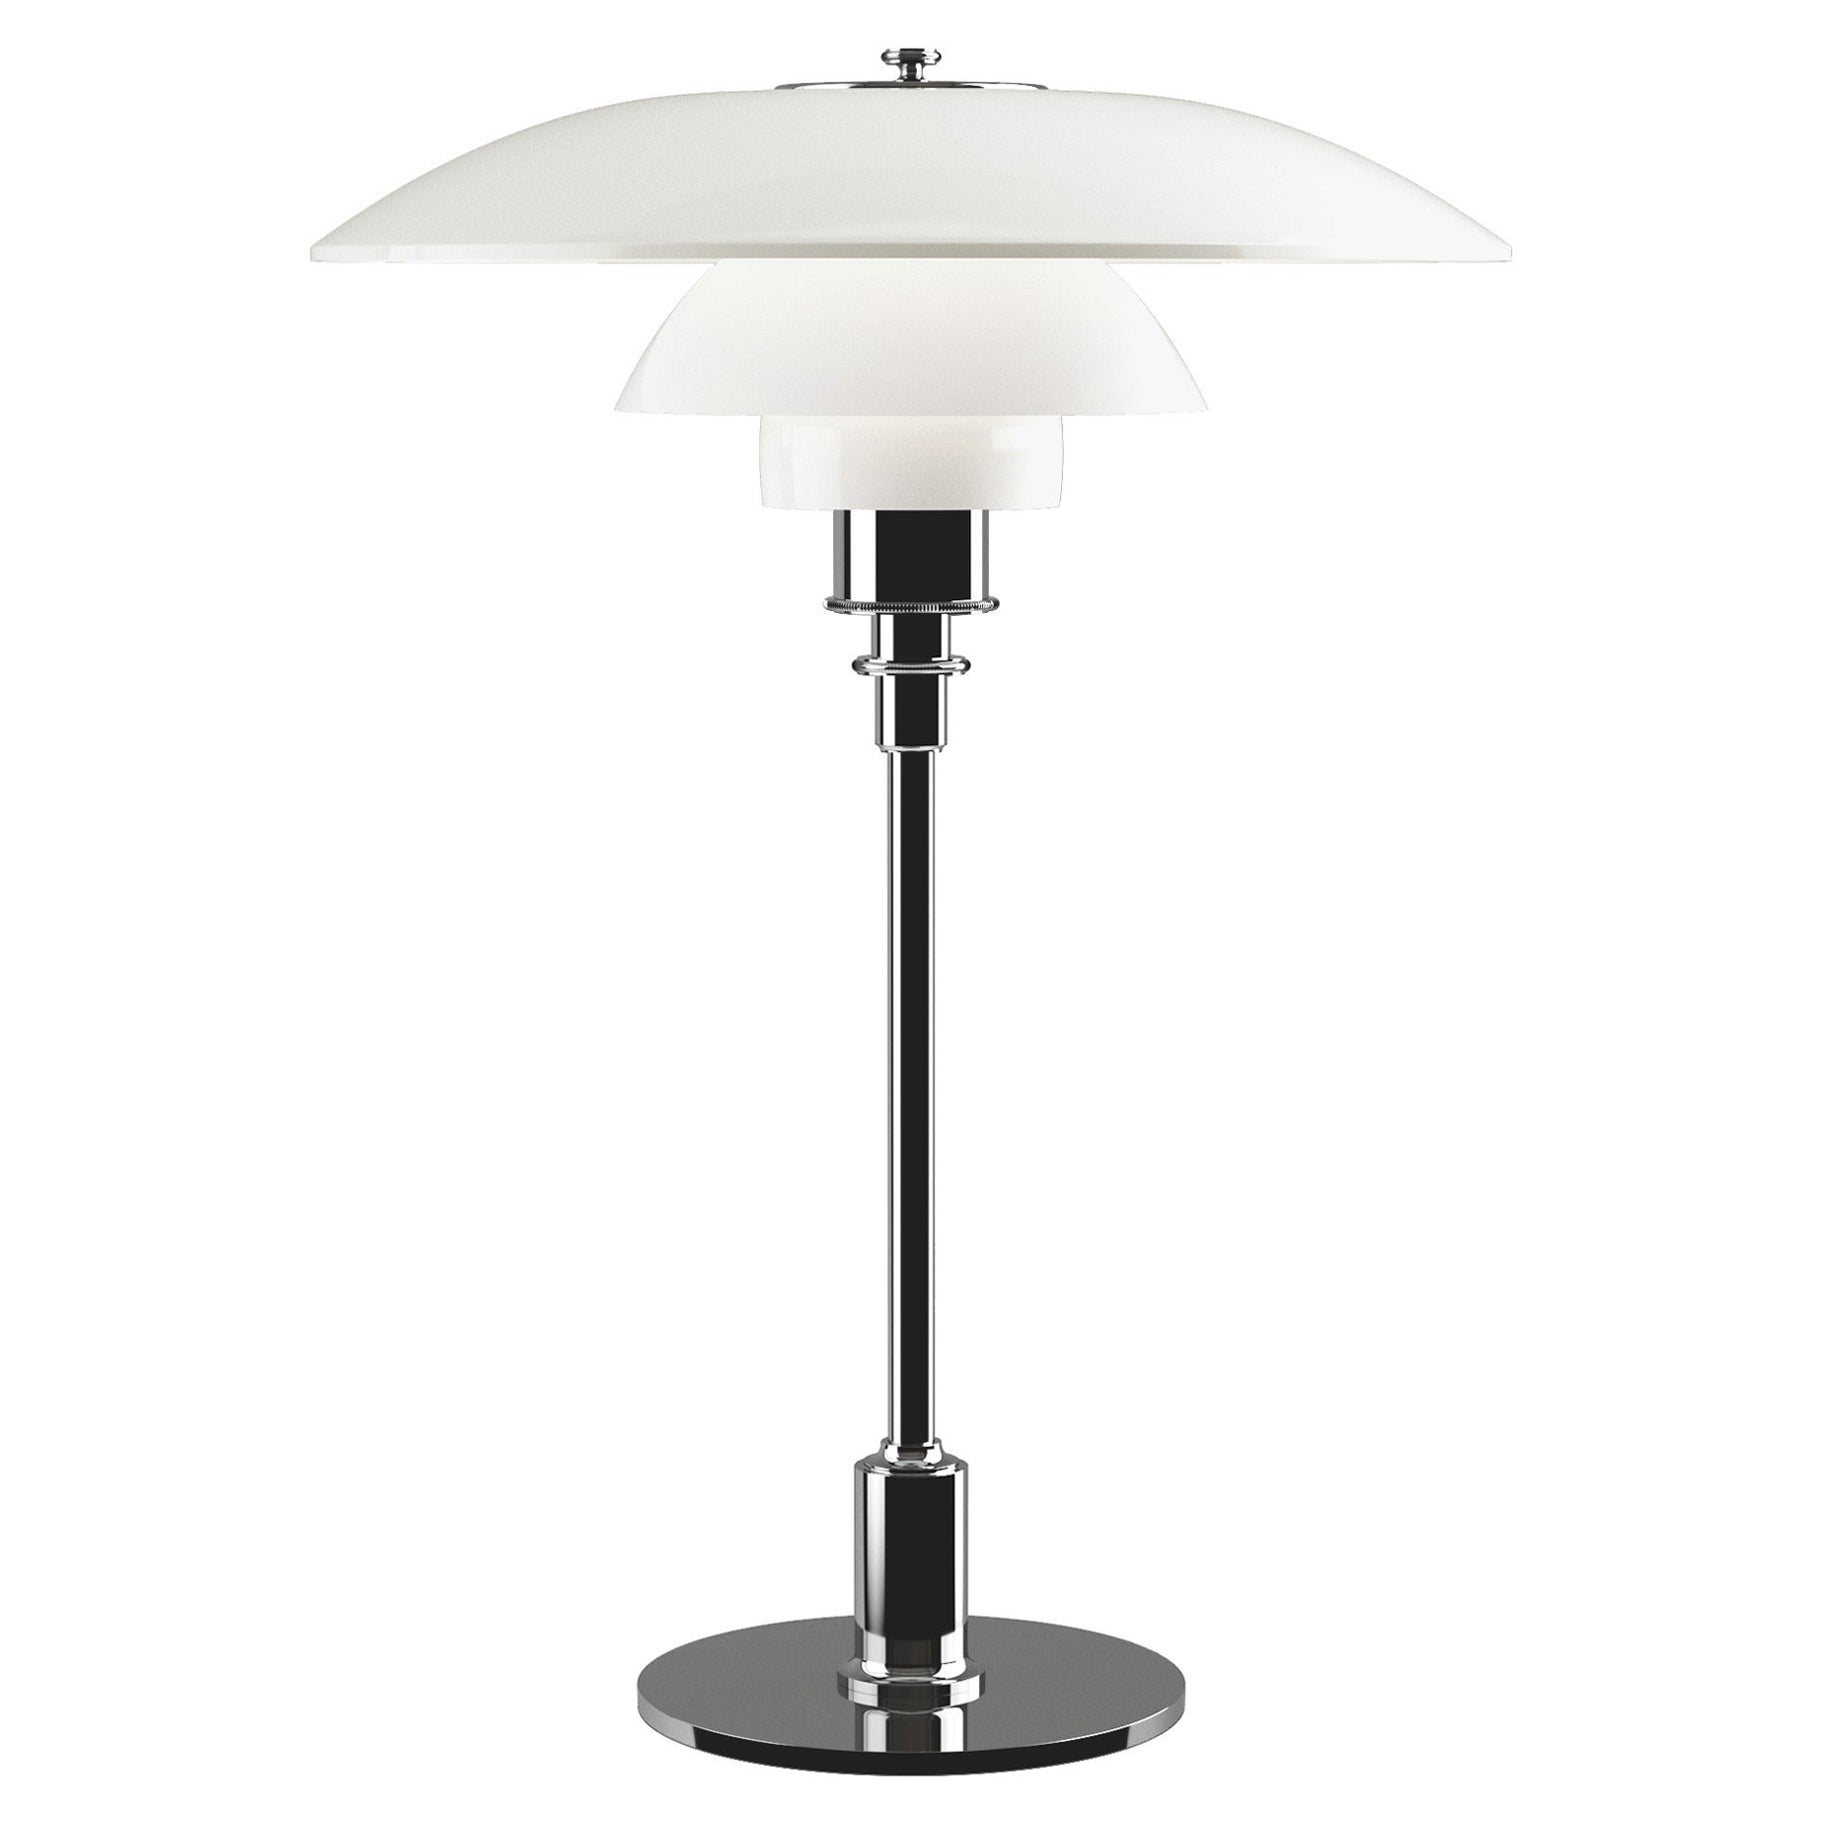 Louis Poulsen PH 3½-2½ Glass Table Lamp in Chrome by Poul Henningsen For Sale